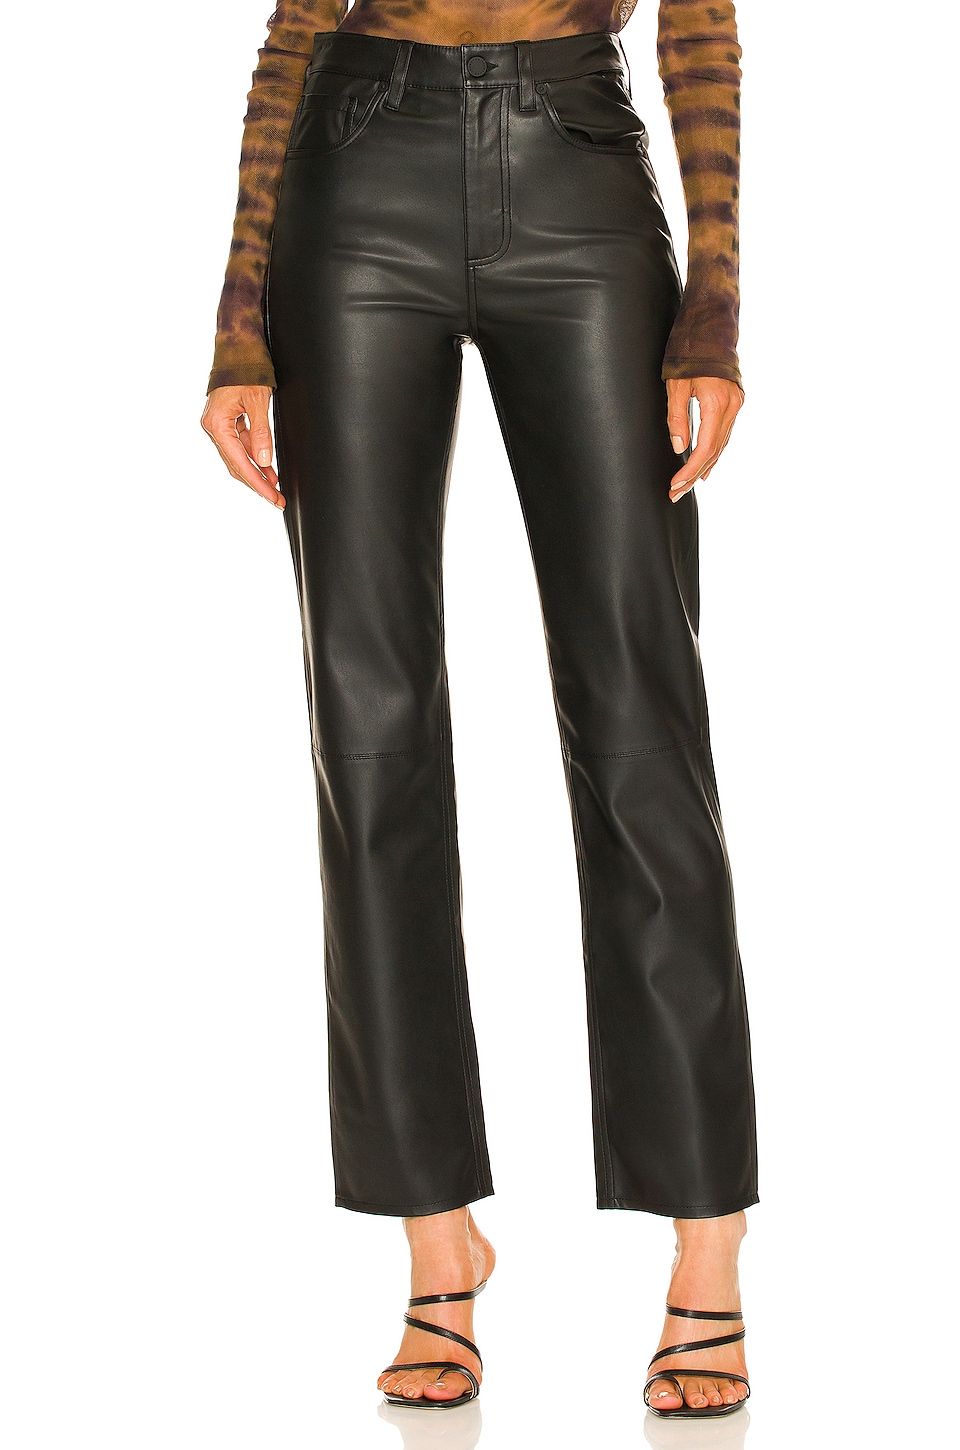 AG Jeans Alexxis Faux Leather Straight in Super Black | REVOLVE